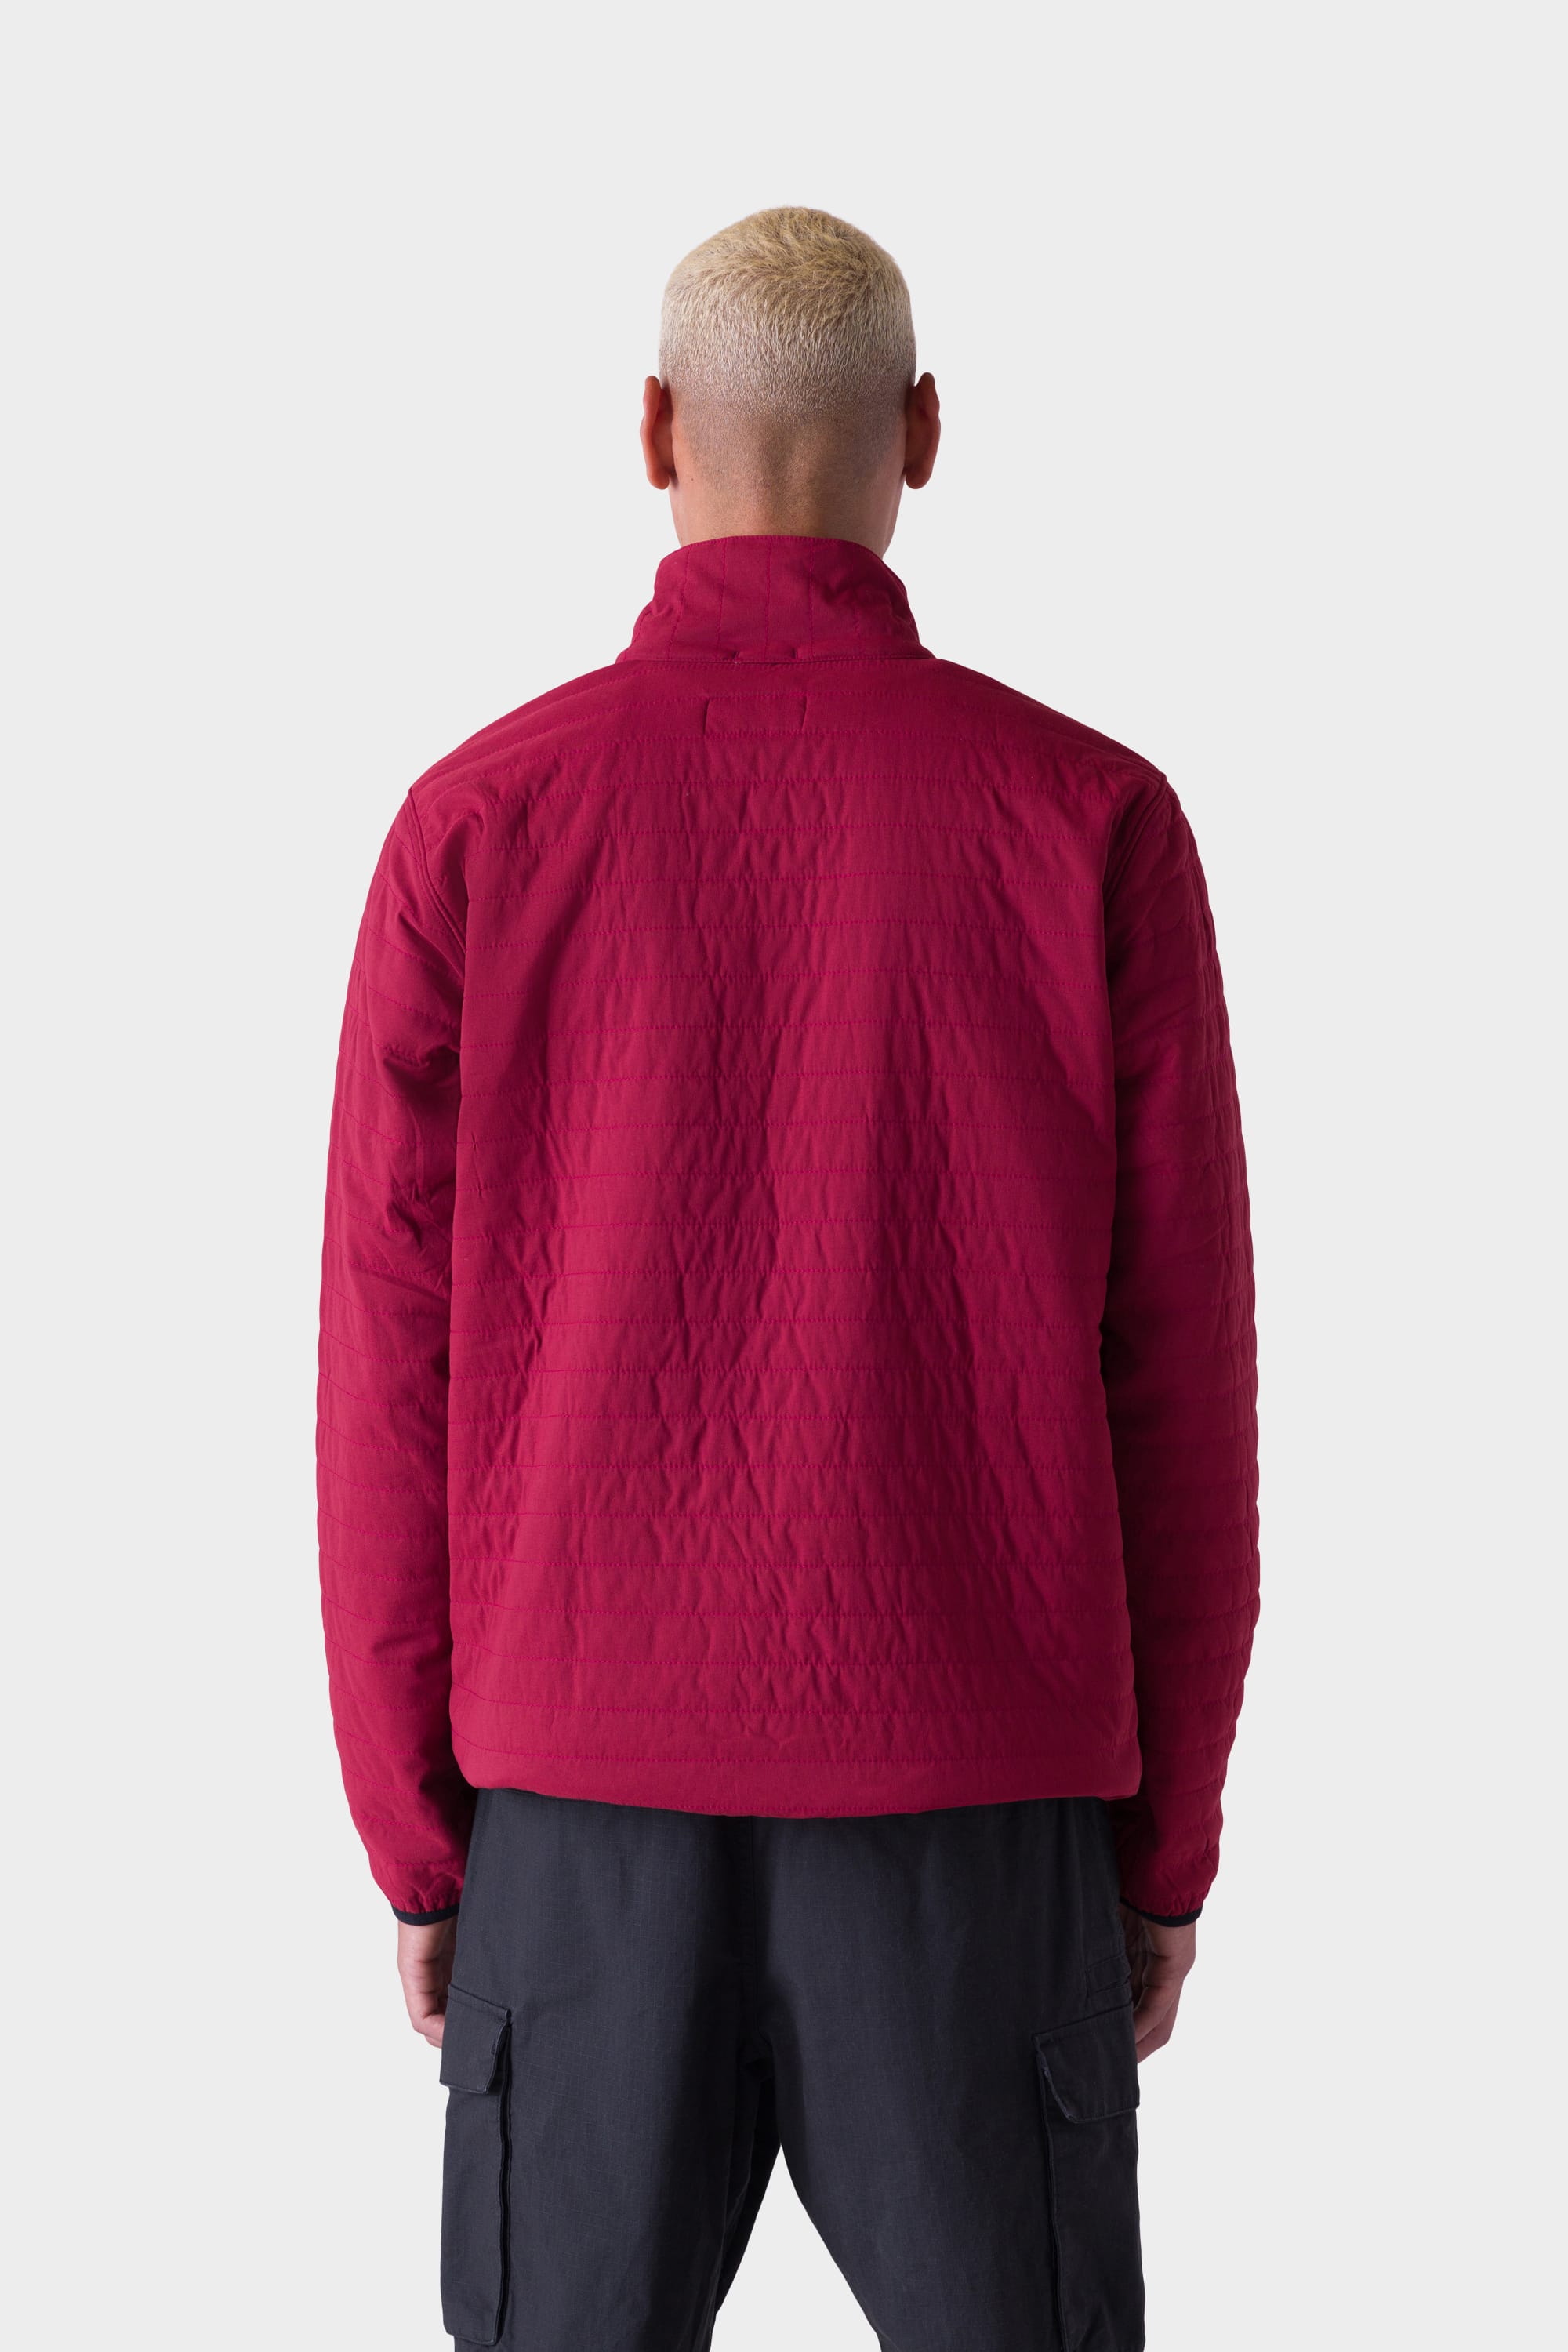 686 Men's Thermadry Merino-Lined Insulated Pullover –